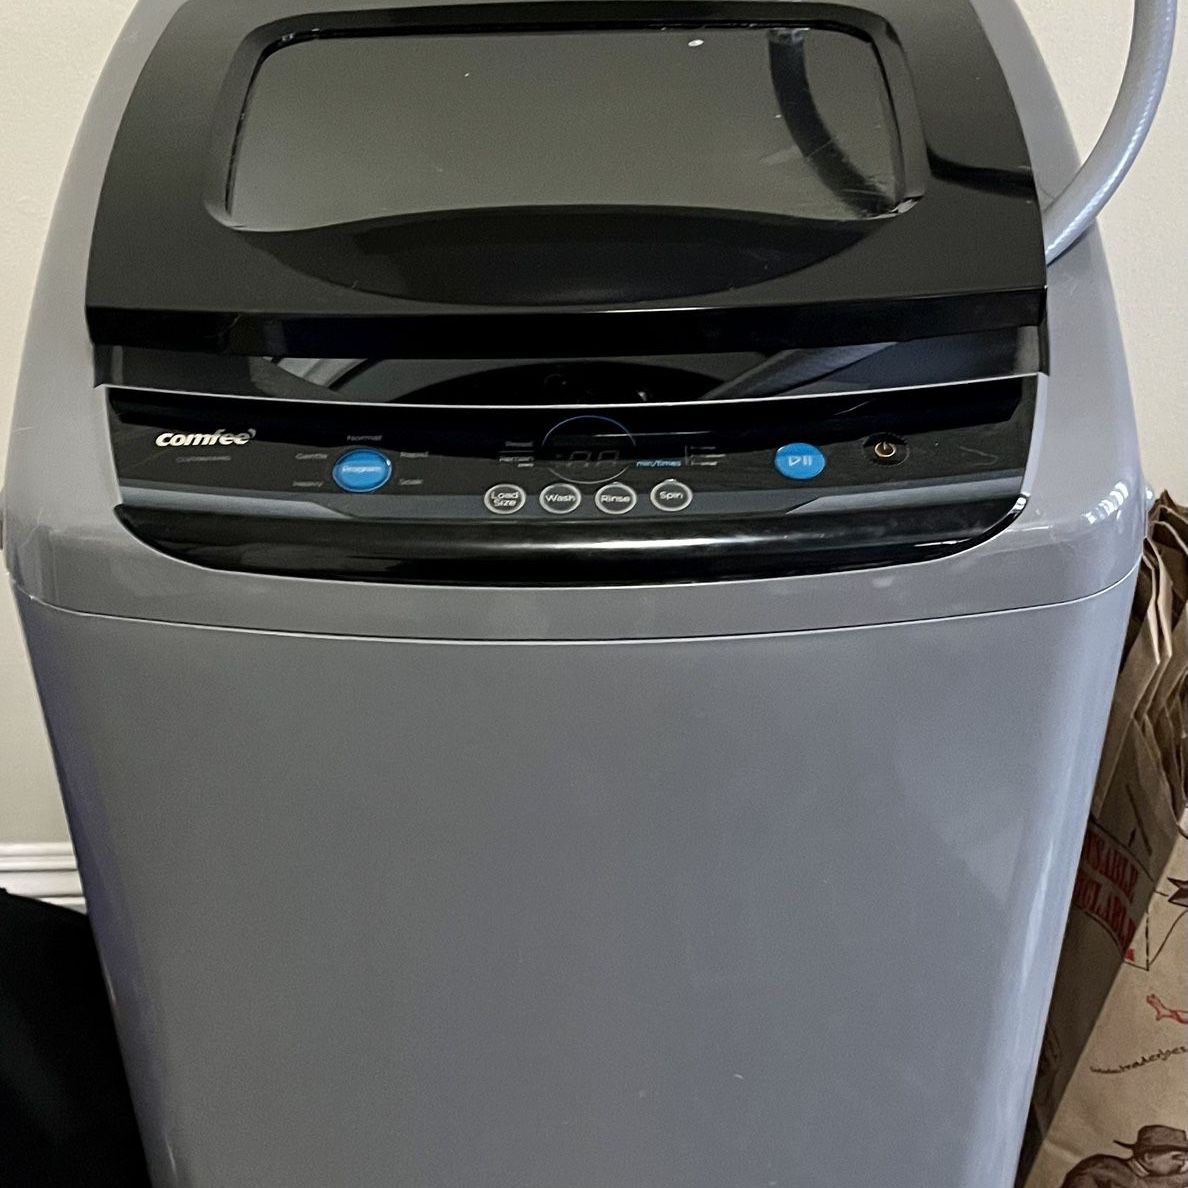 COMFEE' 1.6 Cu.ft Portable Washing Machine, 11lbs Capacity Fully Automatic  Compact Washer with Wheels, 6 Wash Programs Laundry Washer with Drain Pump,  for Sale in New York, NY - OfferUp